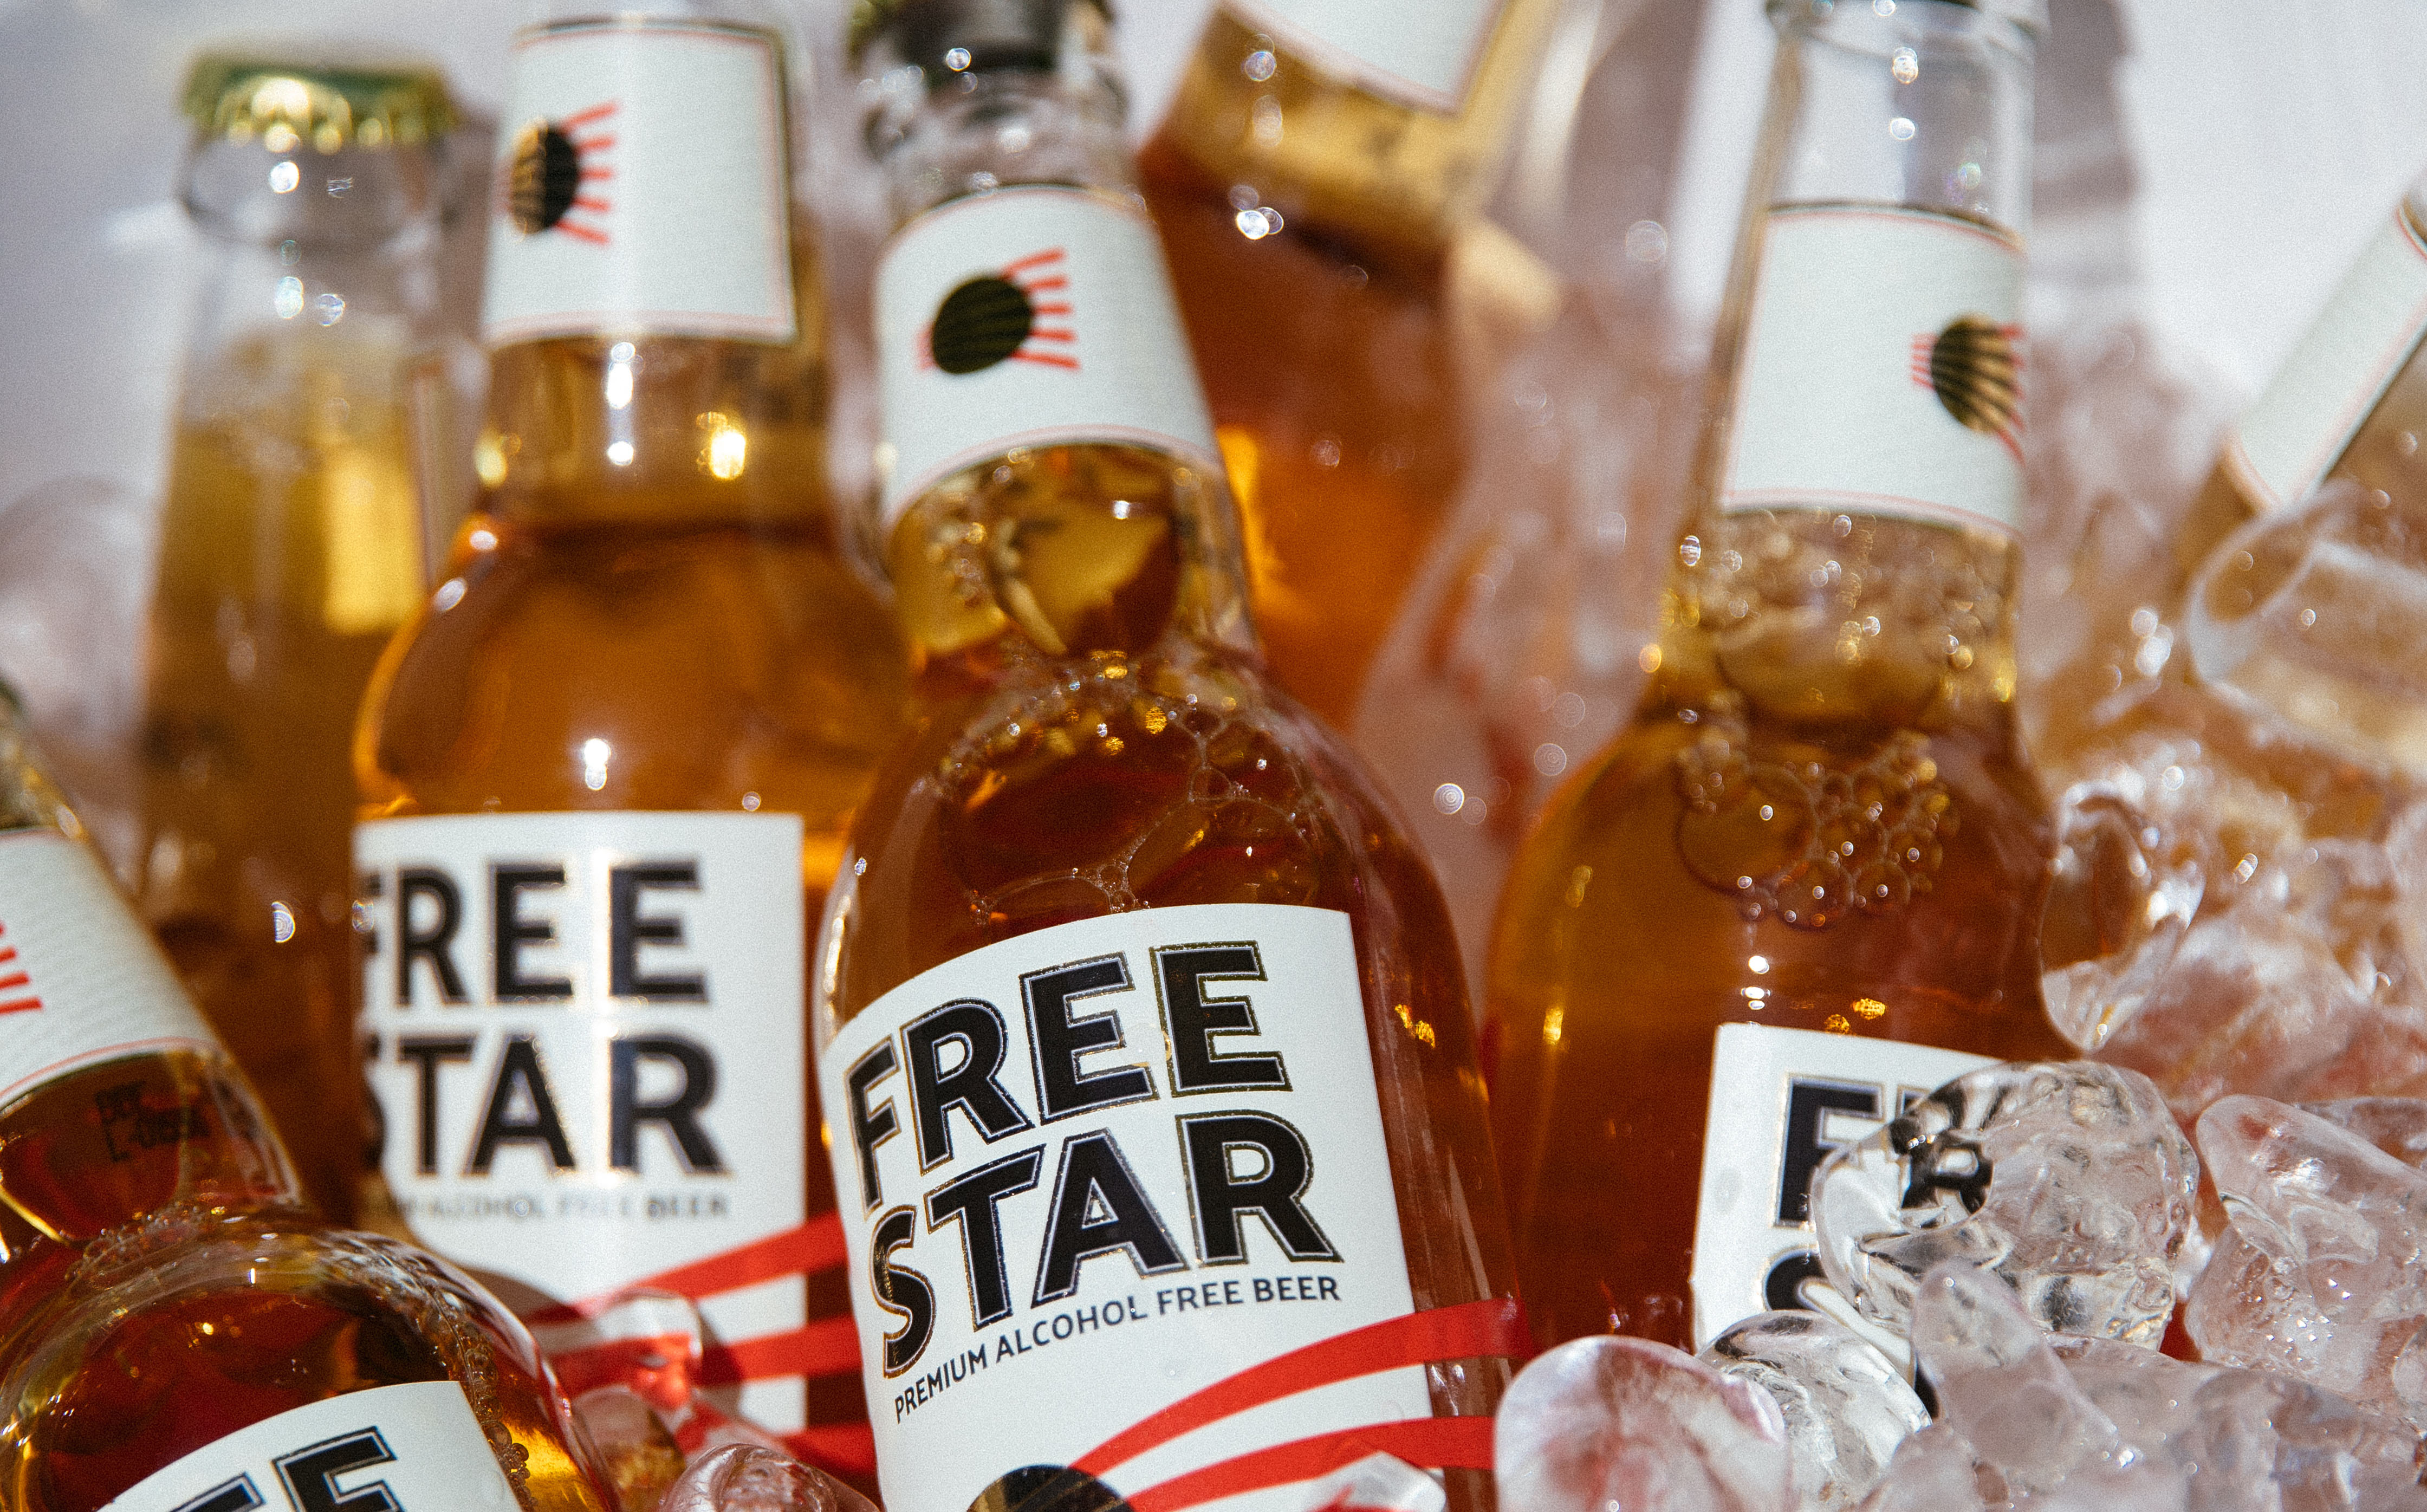 Freestar launch alcohol-free beer using 'new' production process